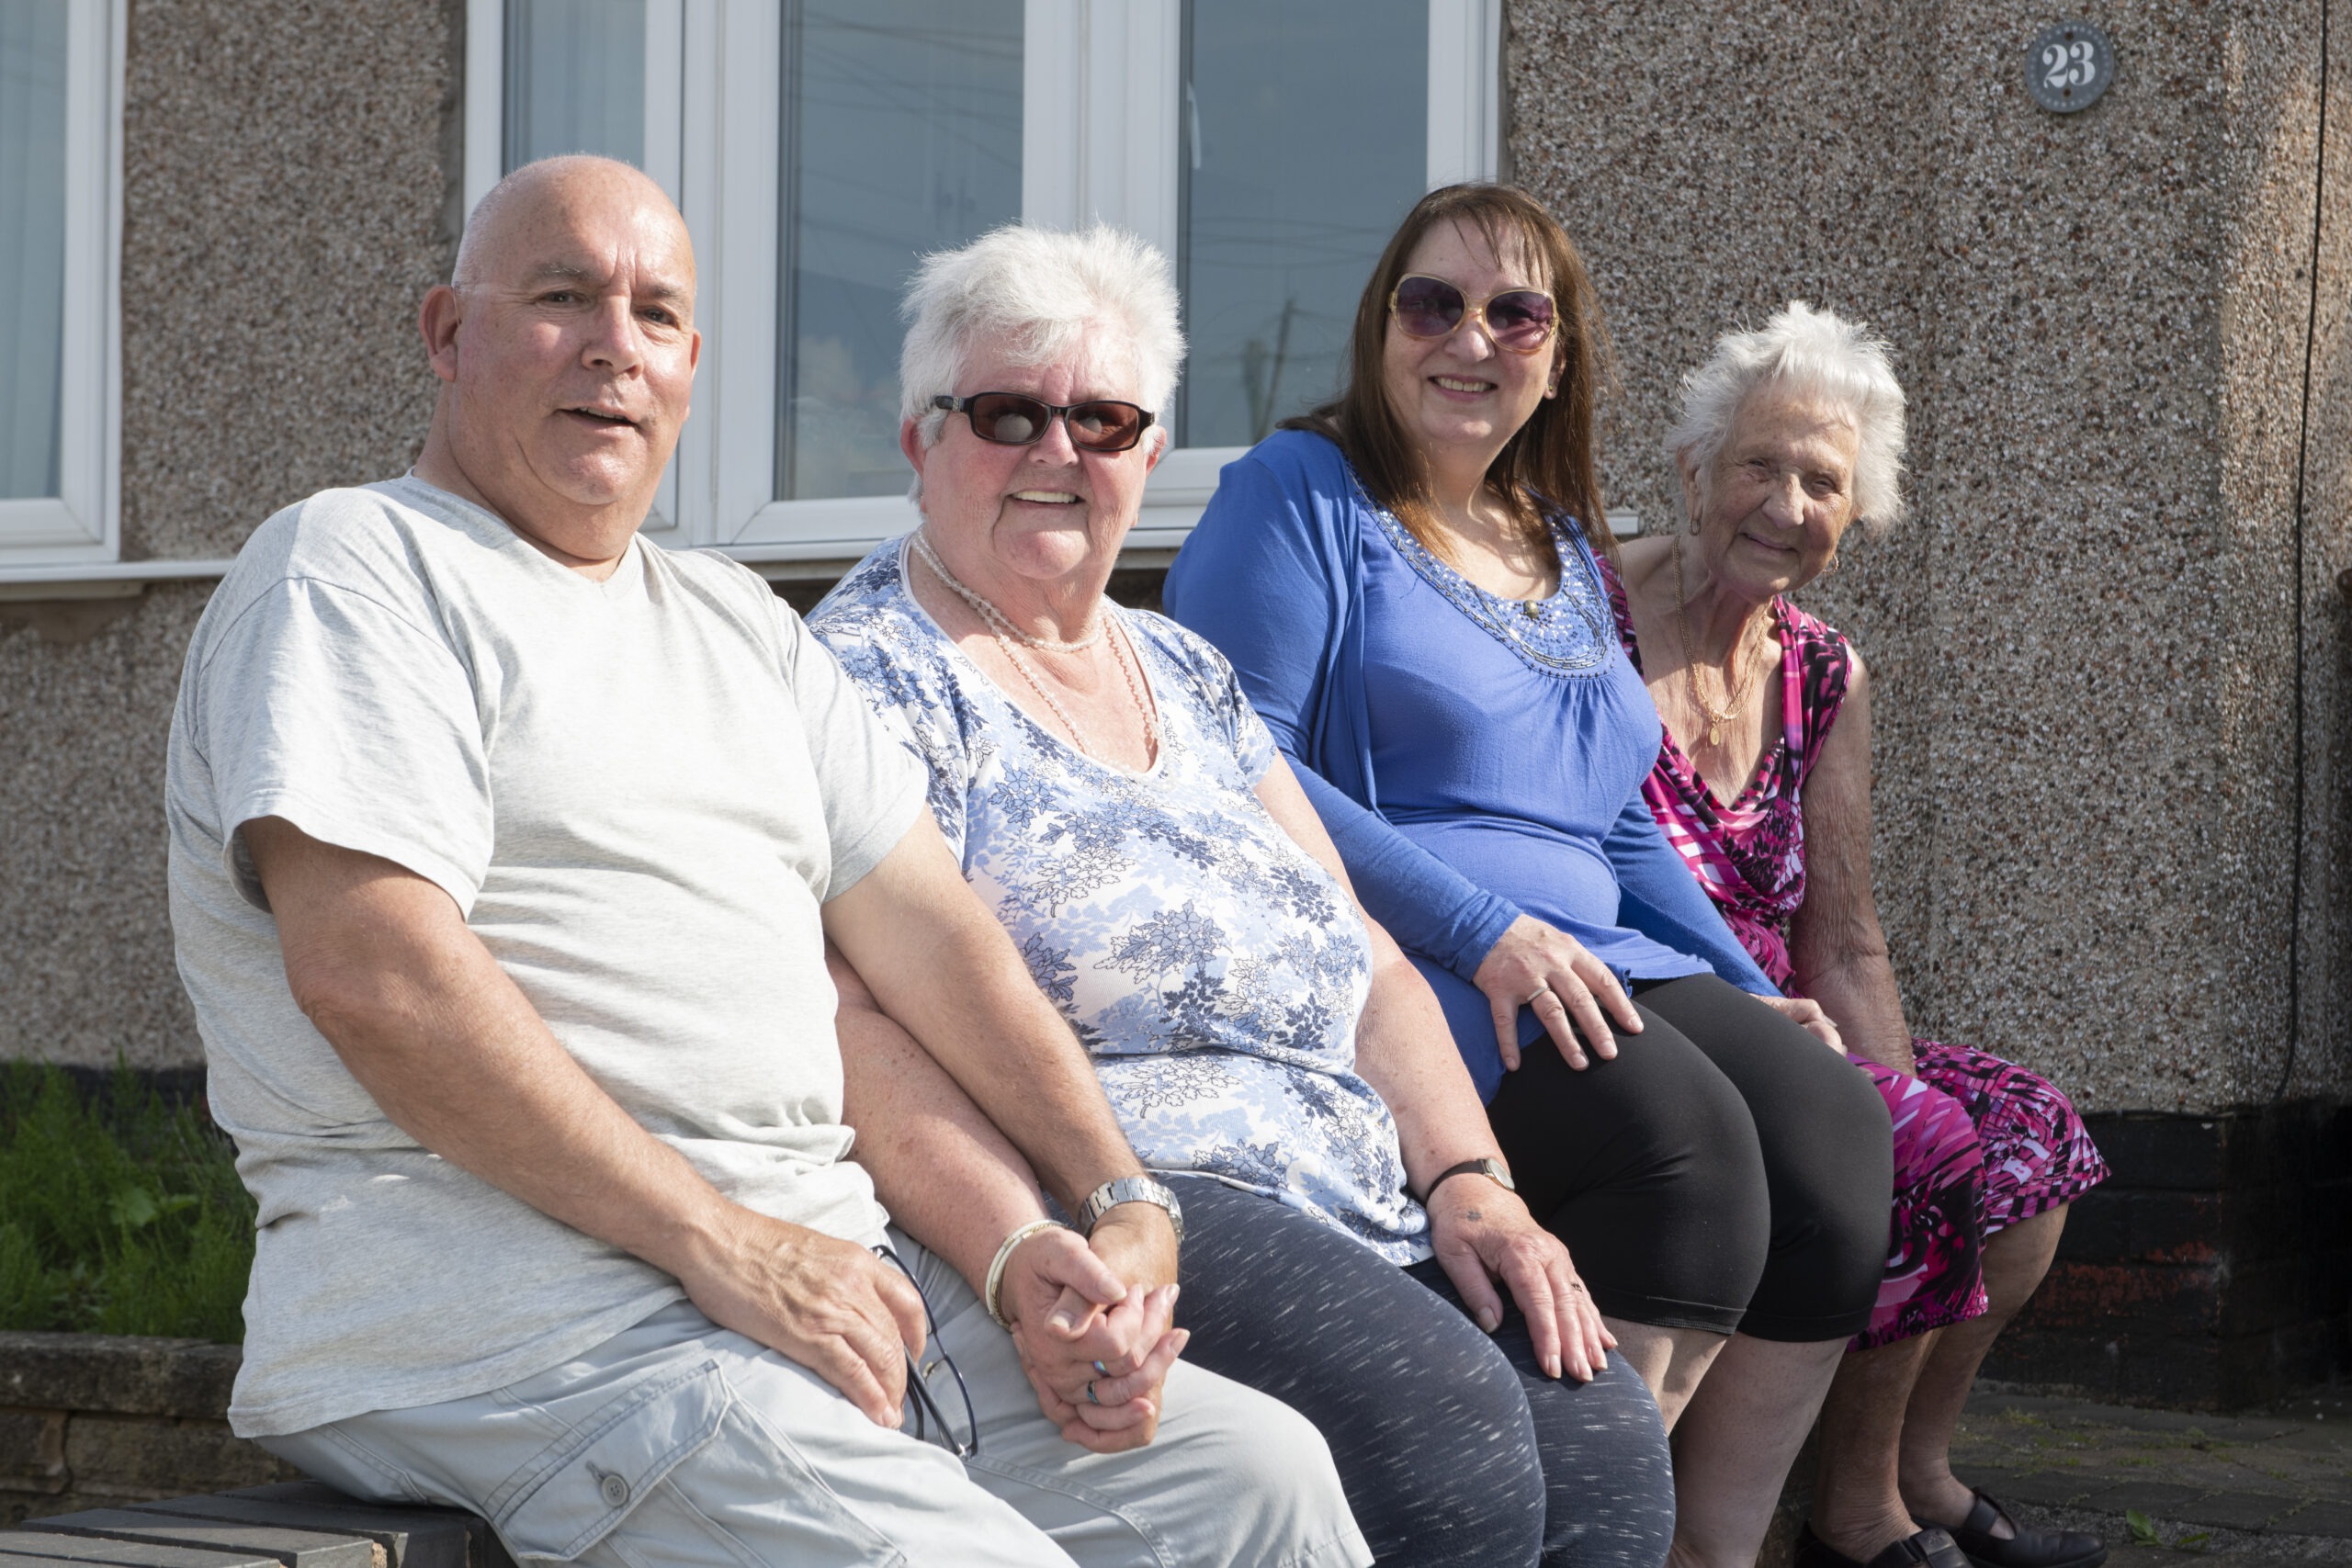 Group photo of three women and a man sat on low garden wall